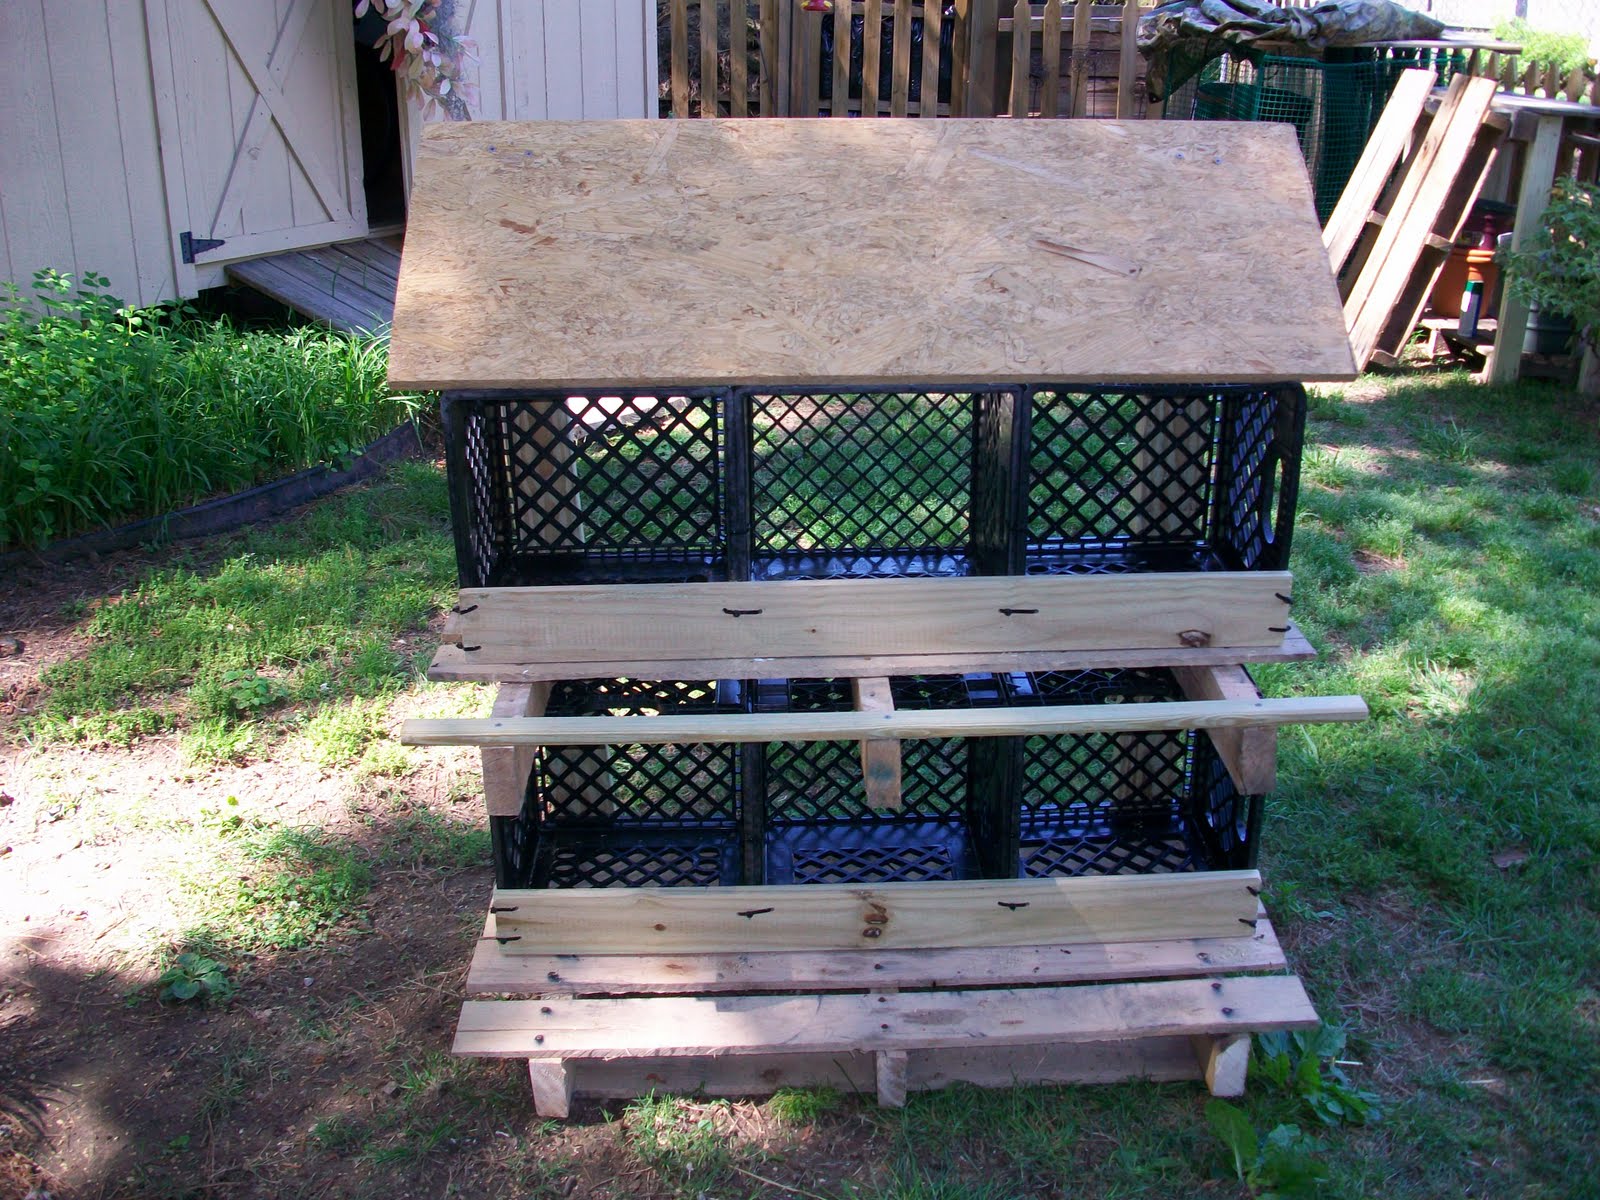 Garden Daddy: NEST BOXES READY FOR THE COOP-D'VILLA